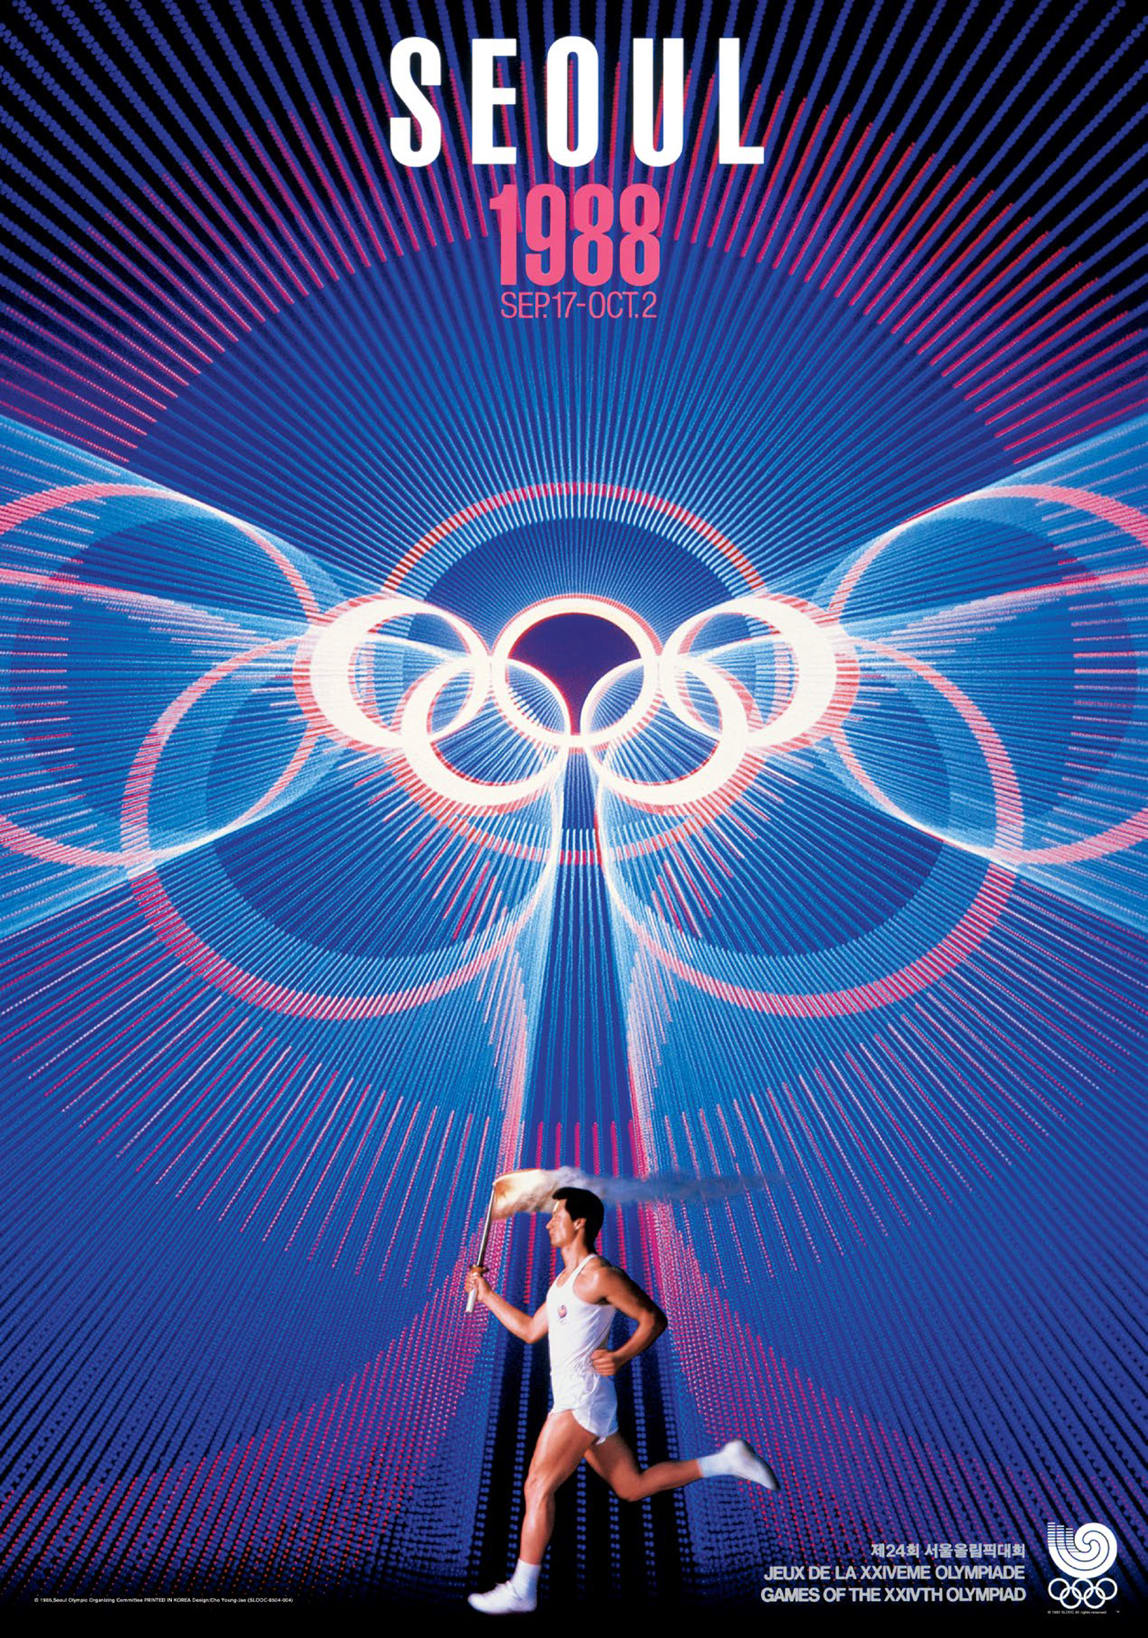 Seoul 1988 Olympic logo, poster design & look of the games